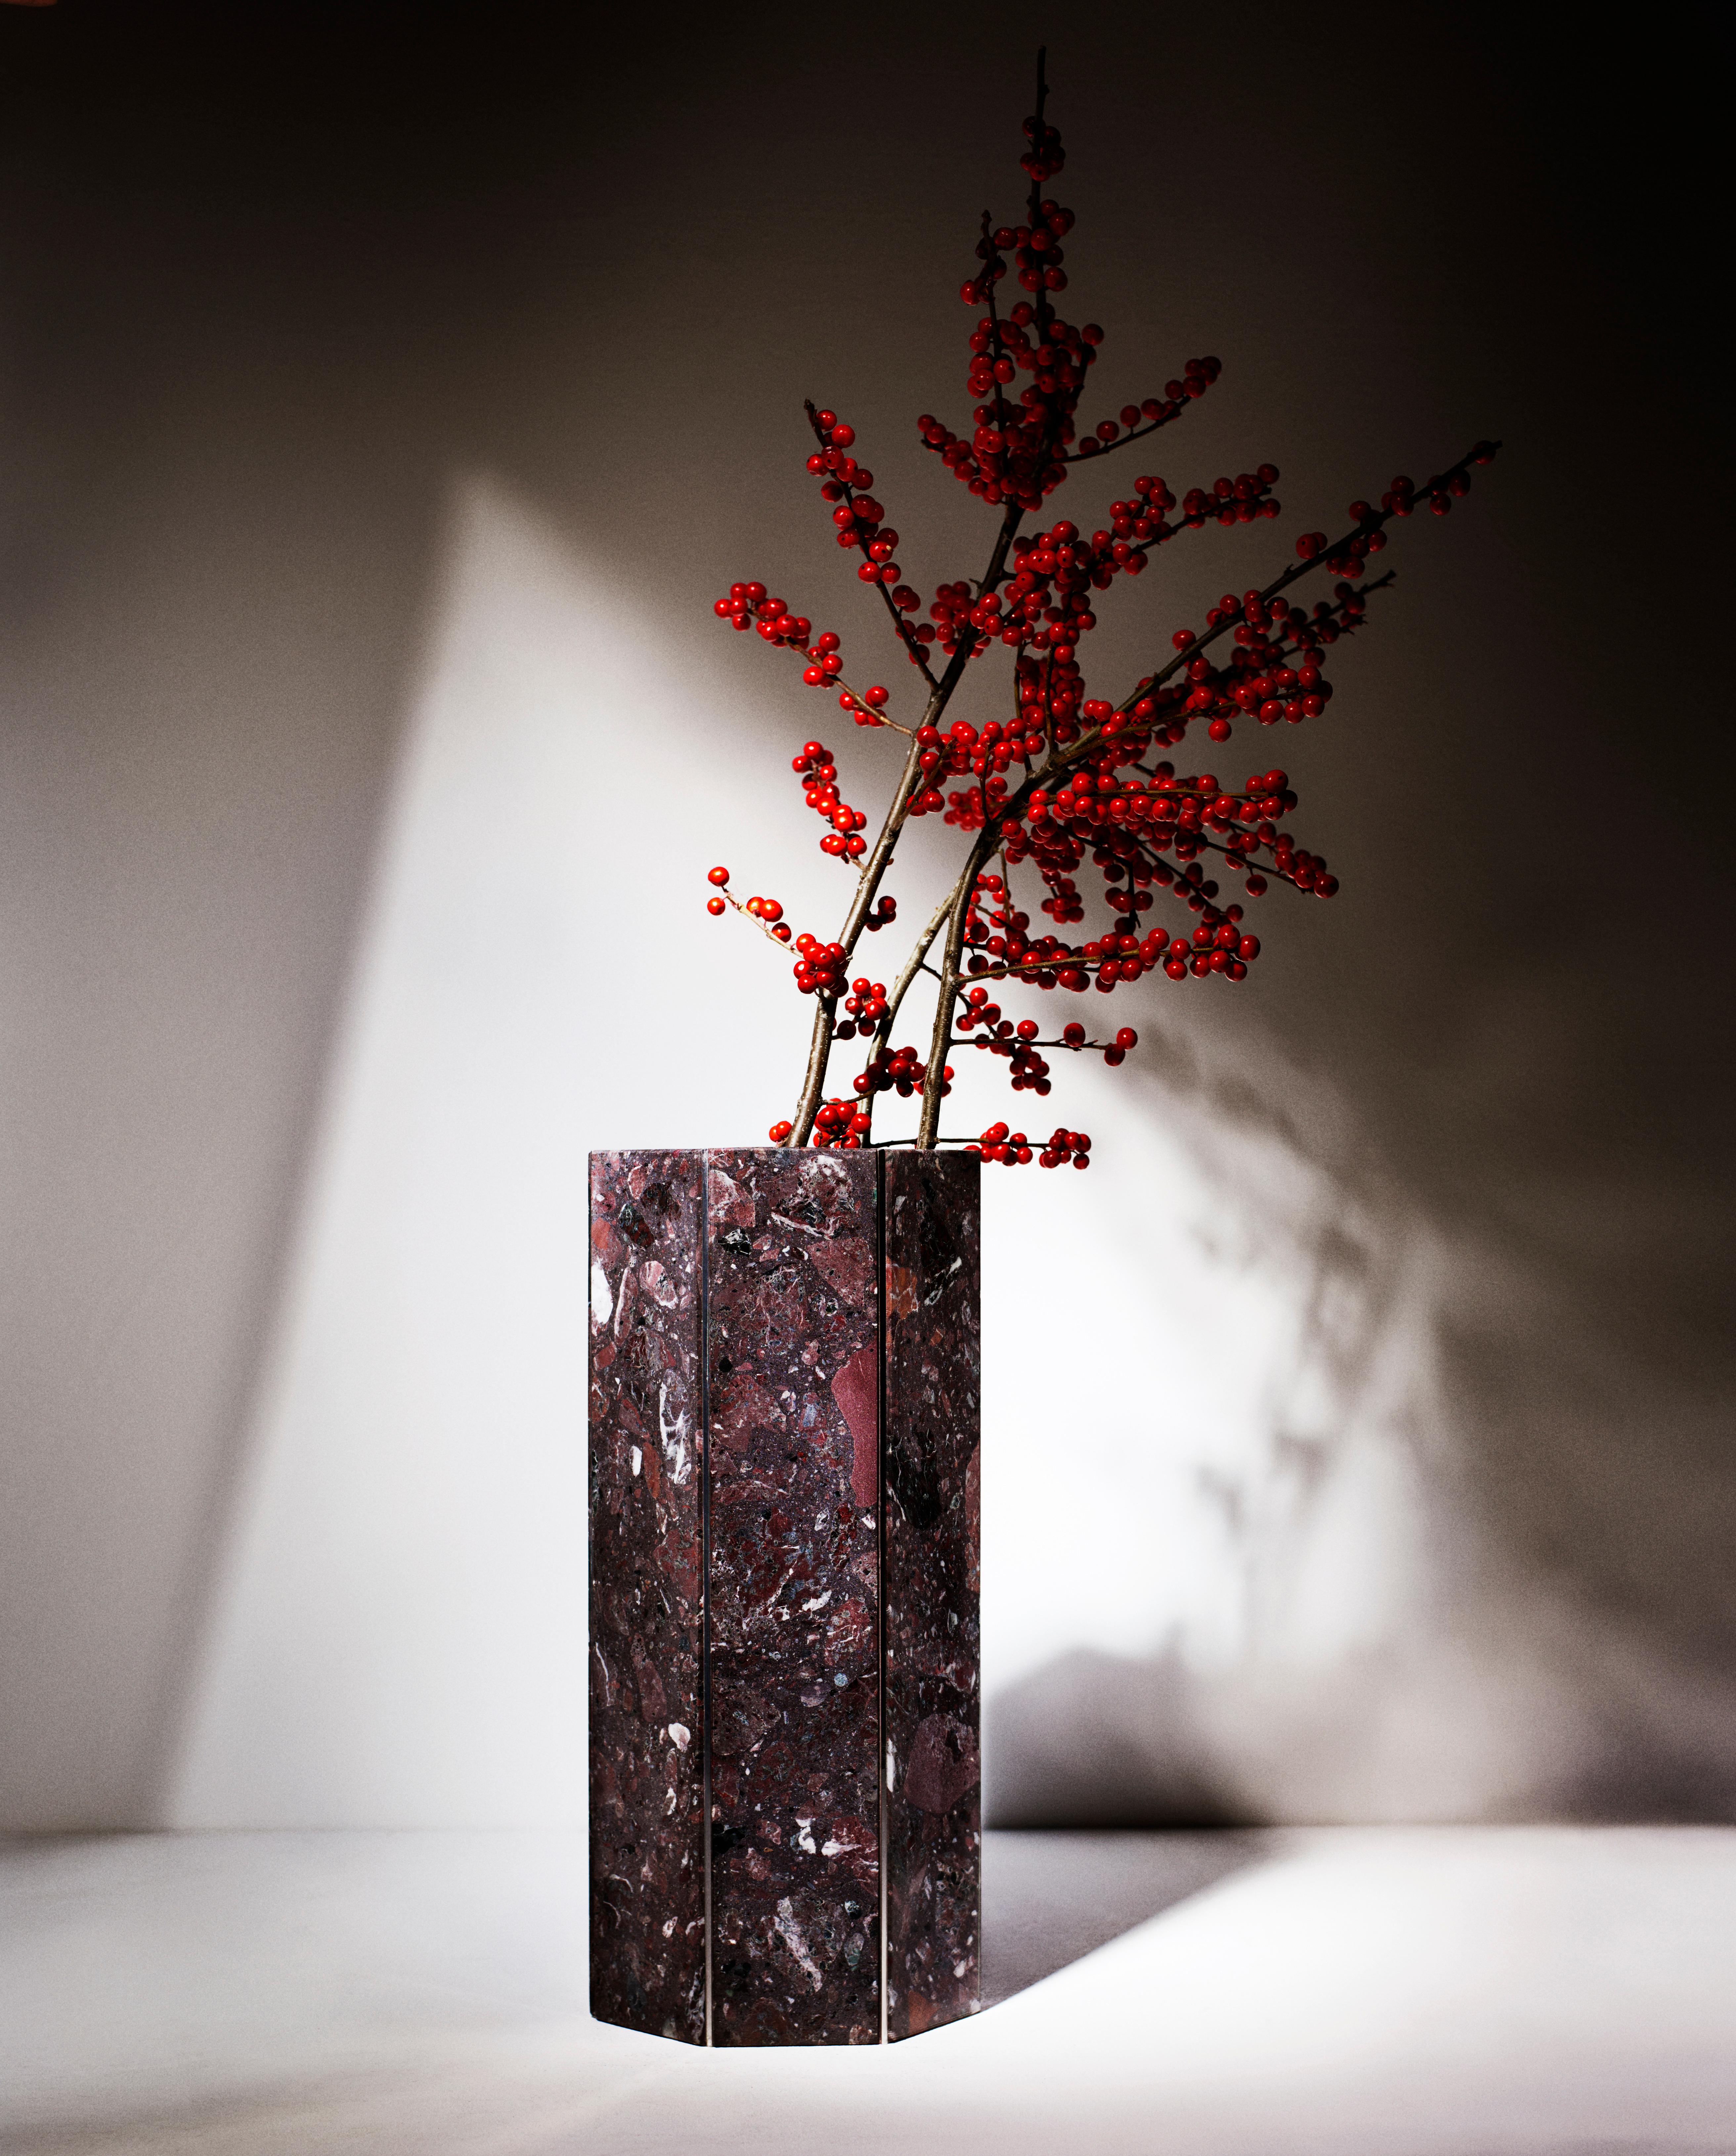 Rosso Levanto Terrazzo Heptagonal Narcissus 2017 vase by Tino Seubert
Dimensions: Ø18 x H 40 cm.
Materials: Rosso Levanto terrazzo marble, polished stainless steel.
Also available in Rosa Perlino marble.  

Tino Seubert
When he first made his